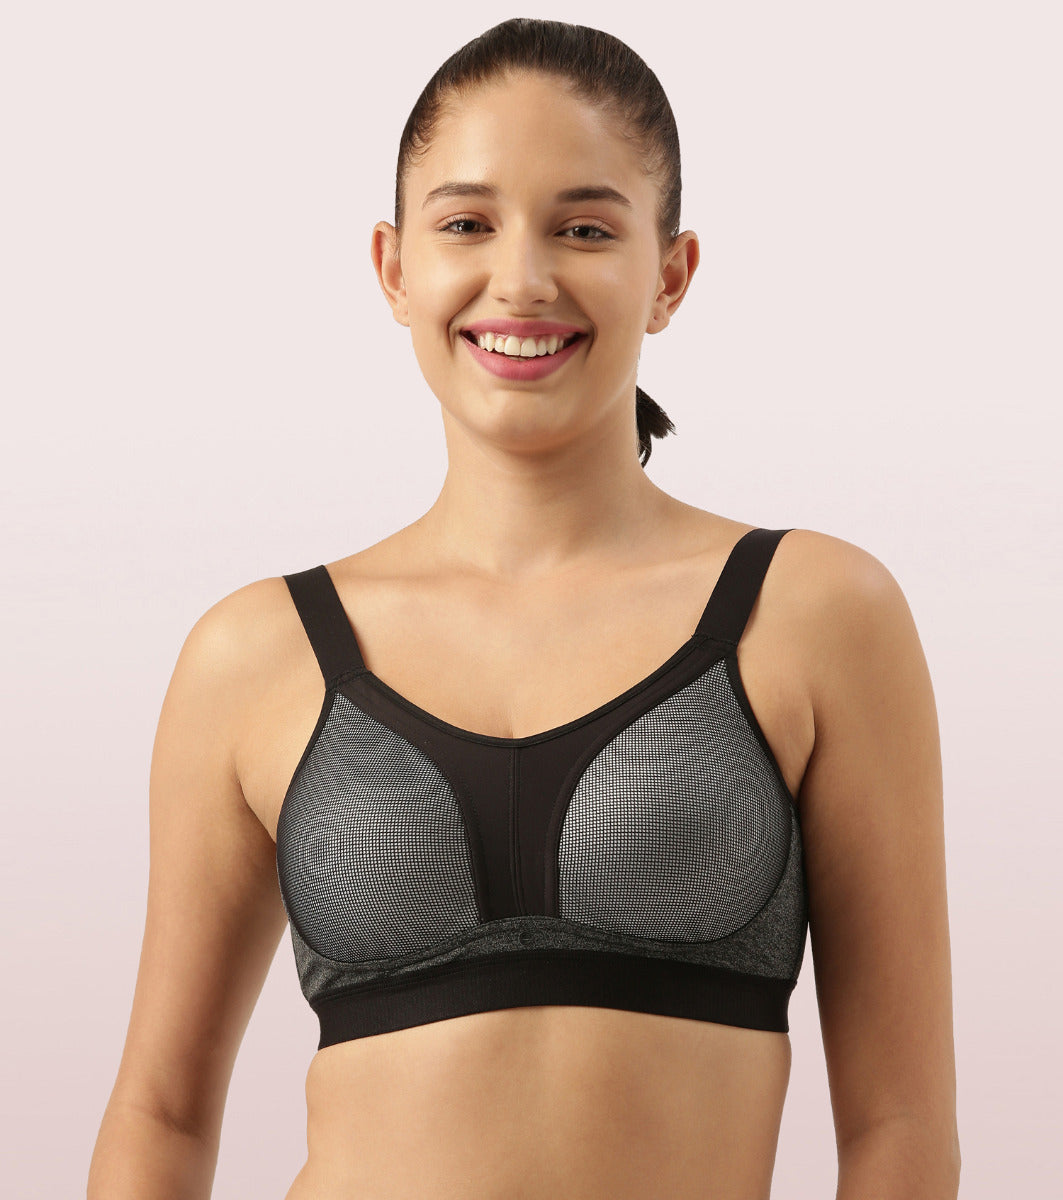 Enamor Agion SB25 Y-panel for Bounce Control High-Impact Sports Bra for Women- Full Coverage, Padded and Wirefree - Grey Melange